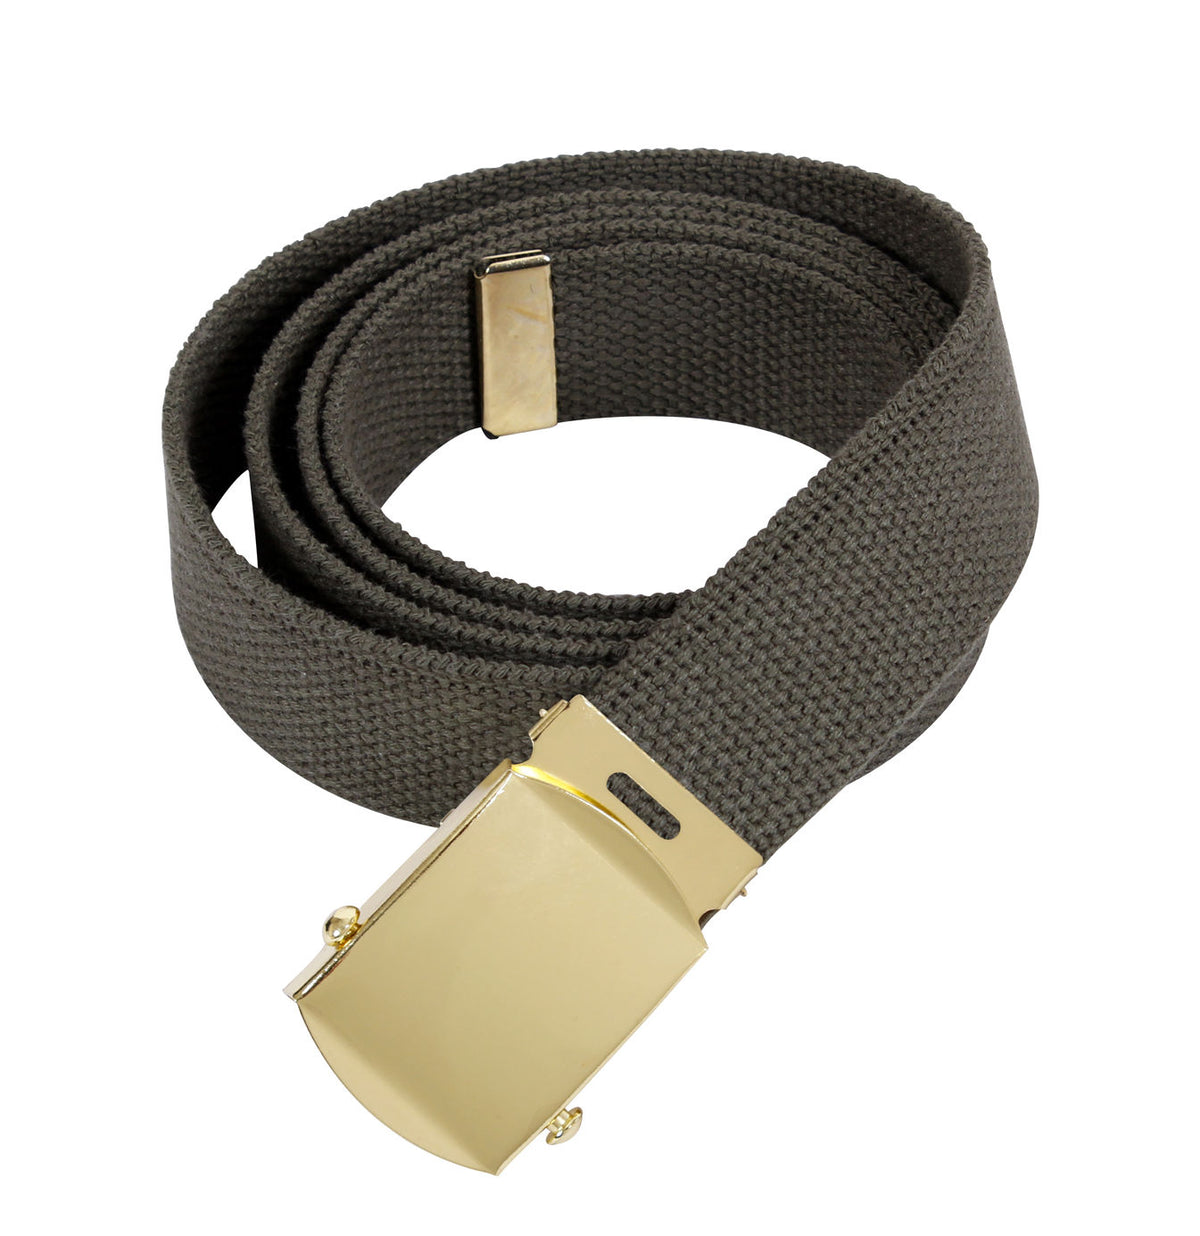 Rothco Military Web Belts with Buckle